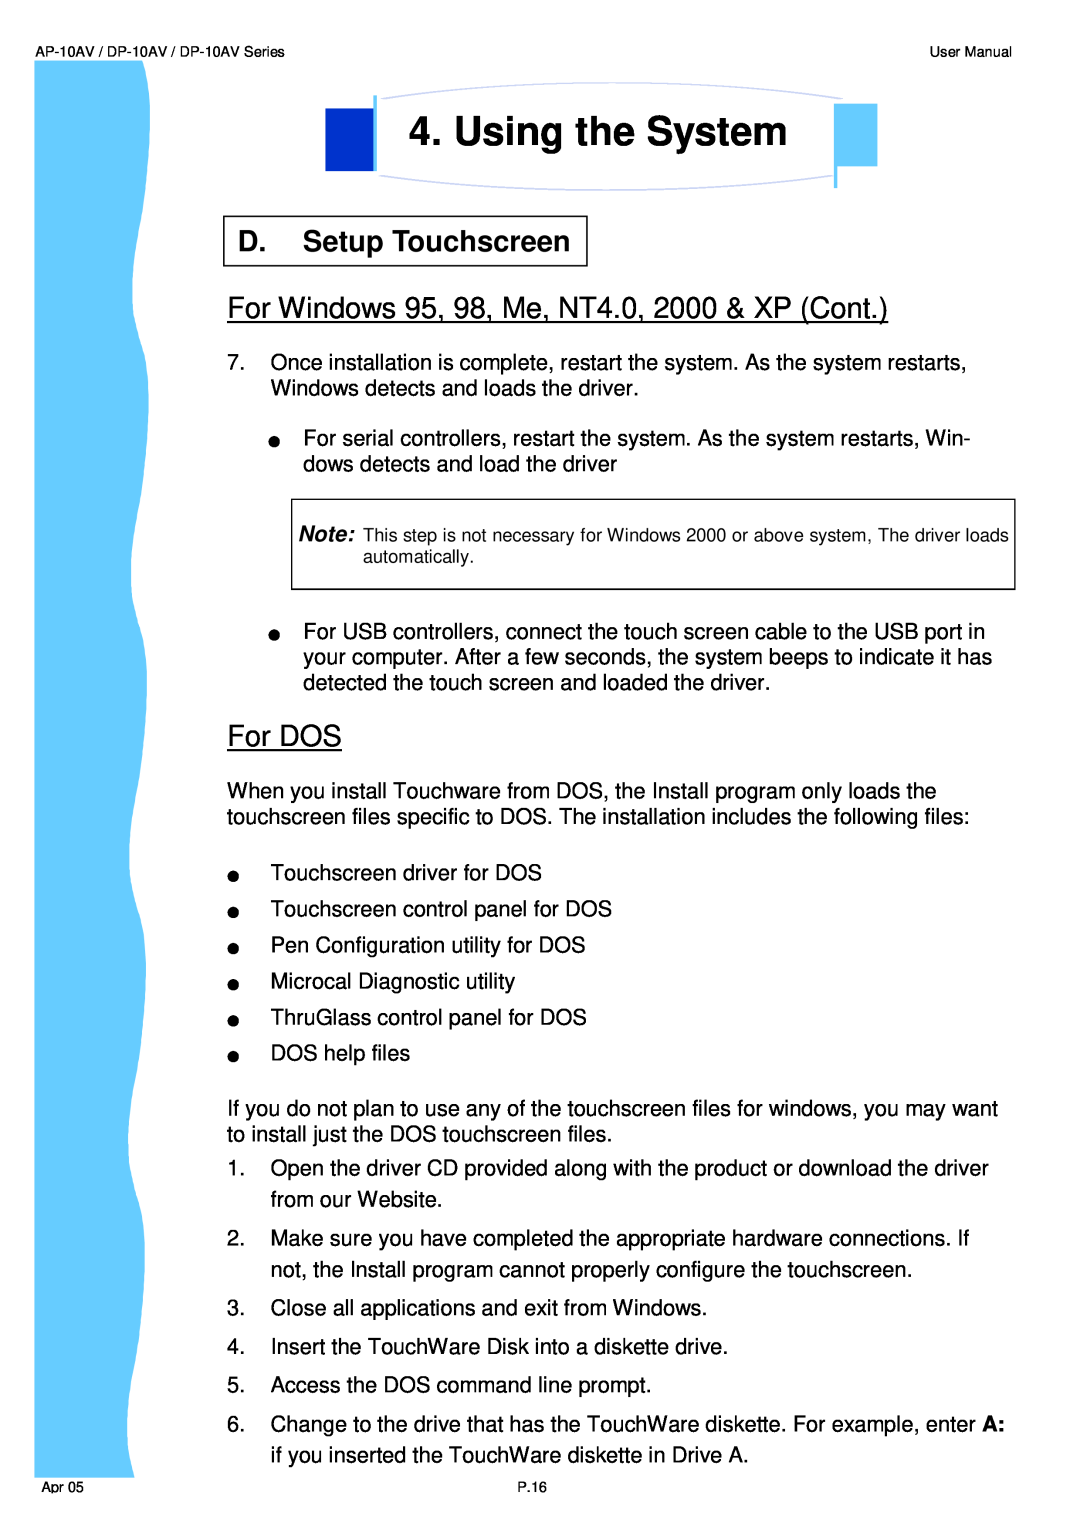 3M UMUV.10-045V2 user manual For Windows 95, 98, Me, NT4.0, 2000 & XP Cont, For DOS, Using the System, D. Setup Touchscreen 